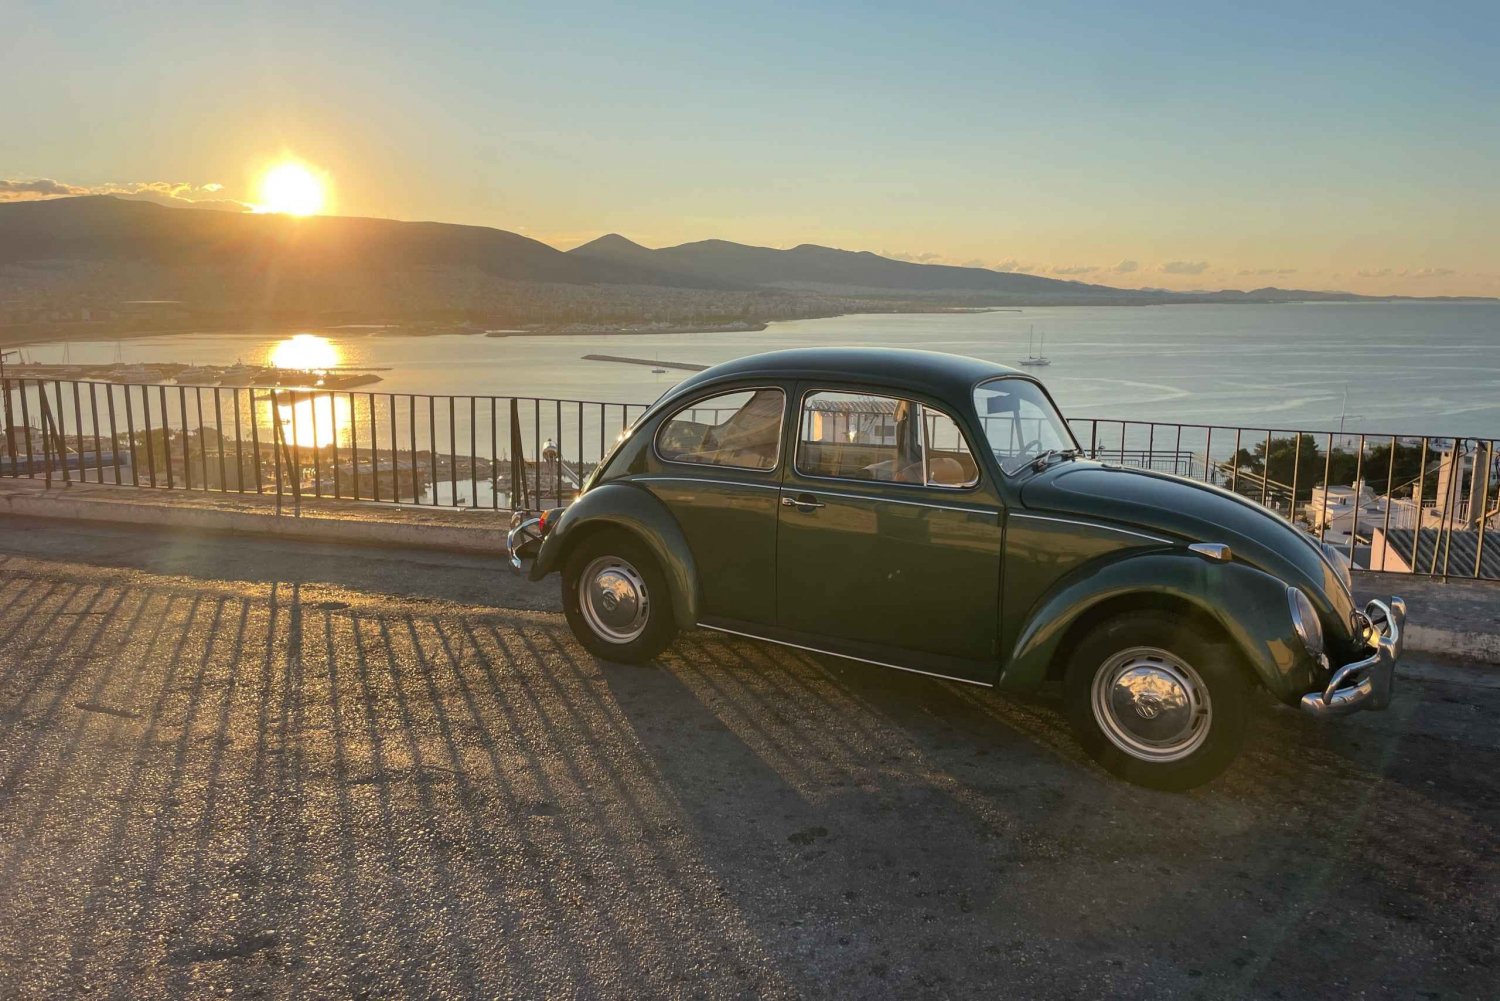 Athens: Riviera Photo Tour in a Vintage Volkswagen Beetle